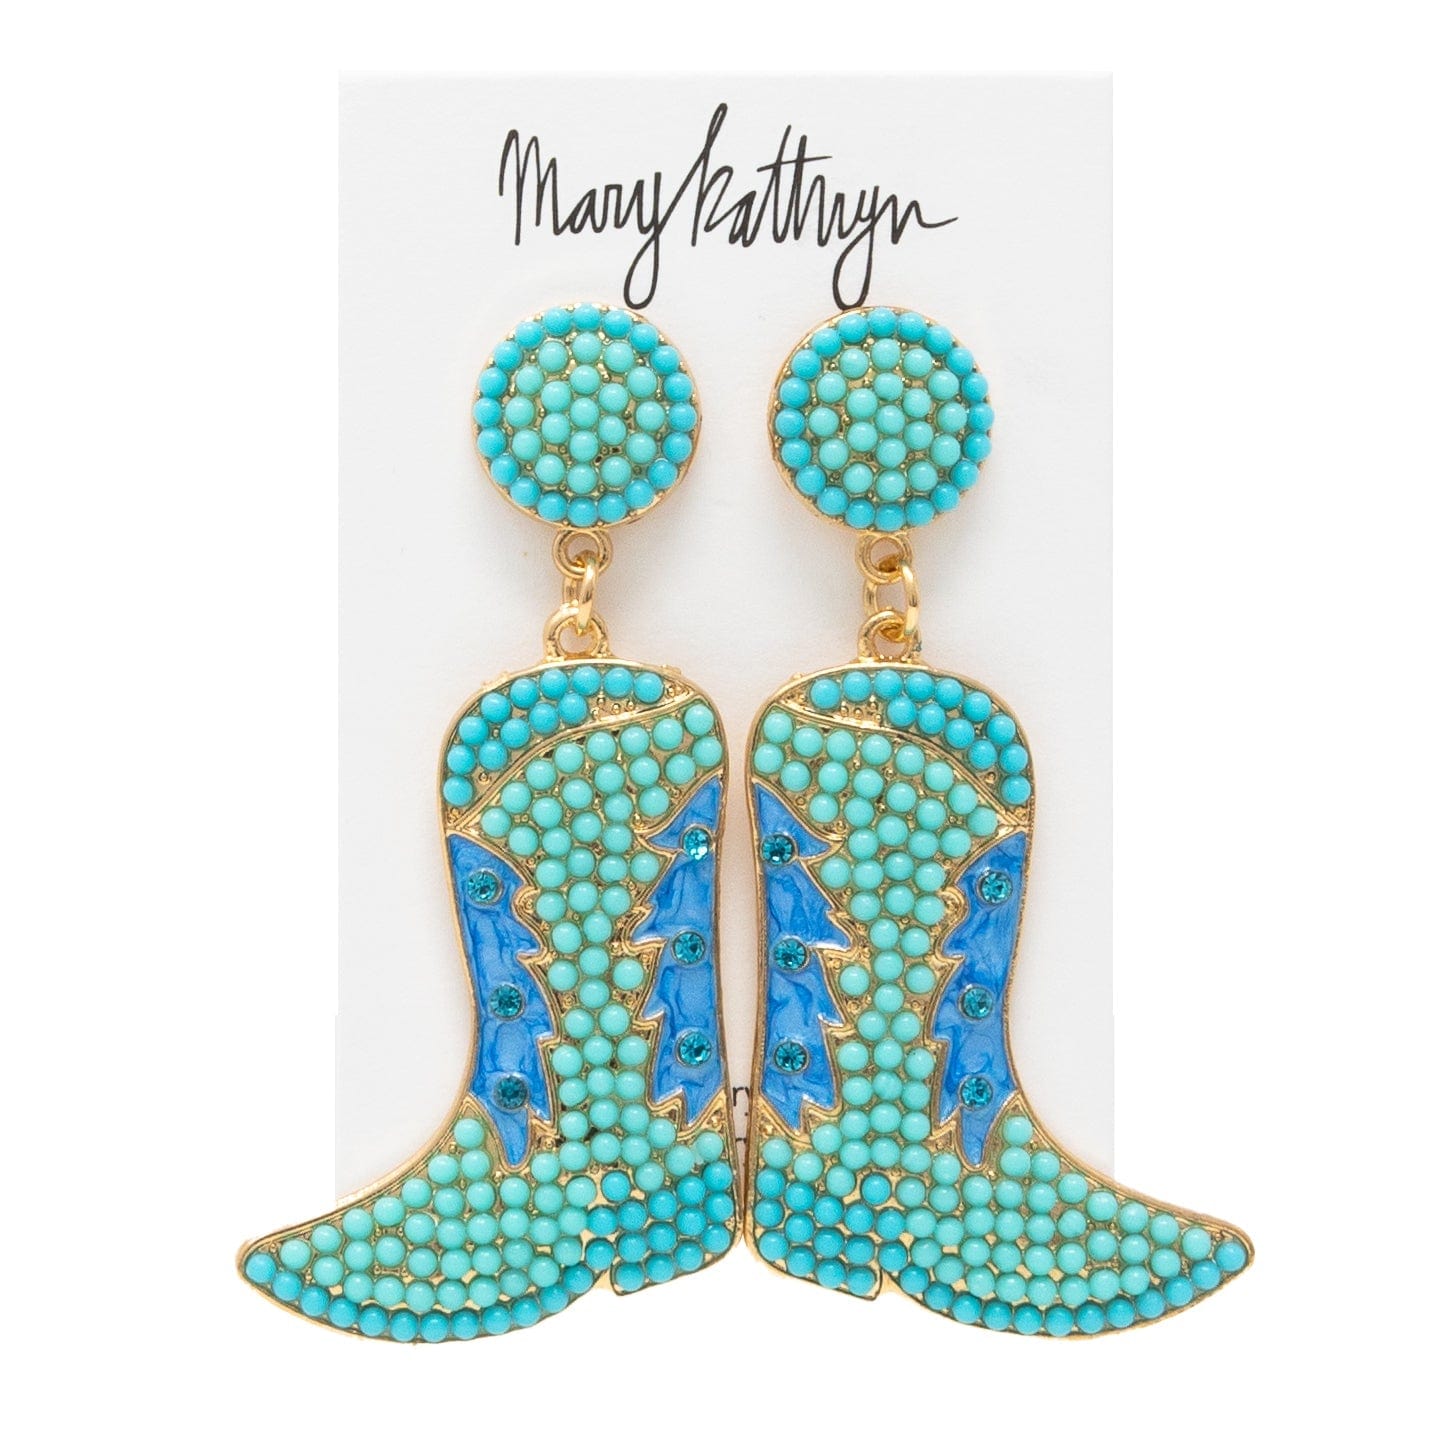 Mary Kathryn Design Jewelry Turquoise Sheryl Boot Earrings